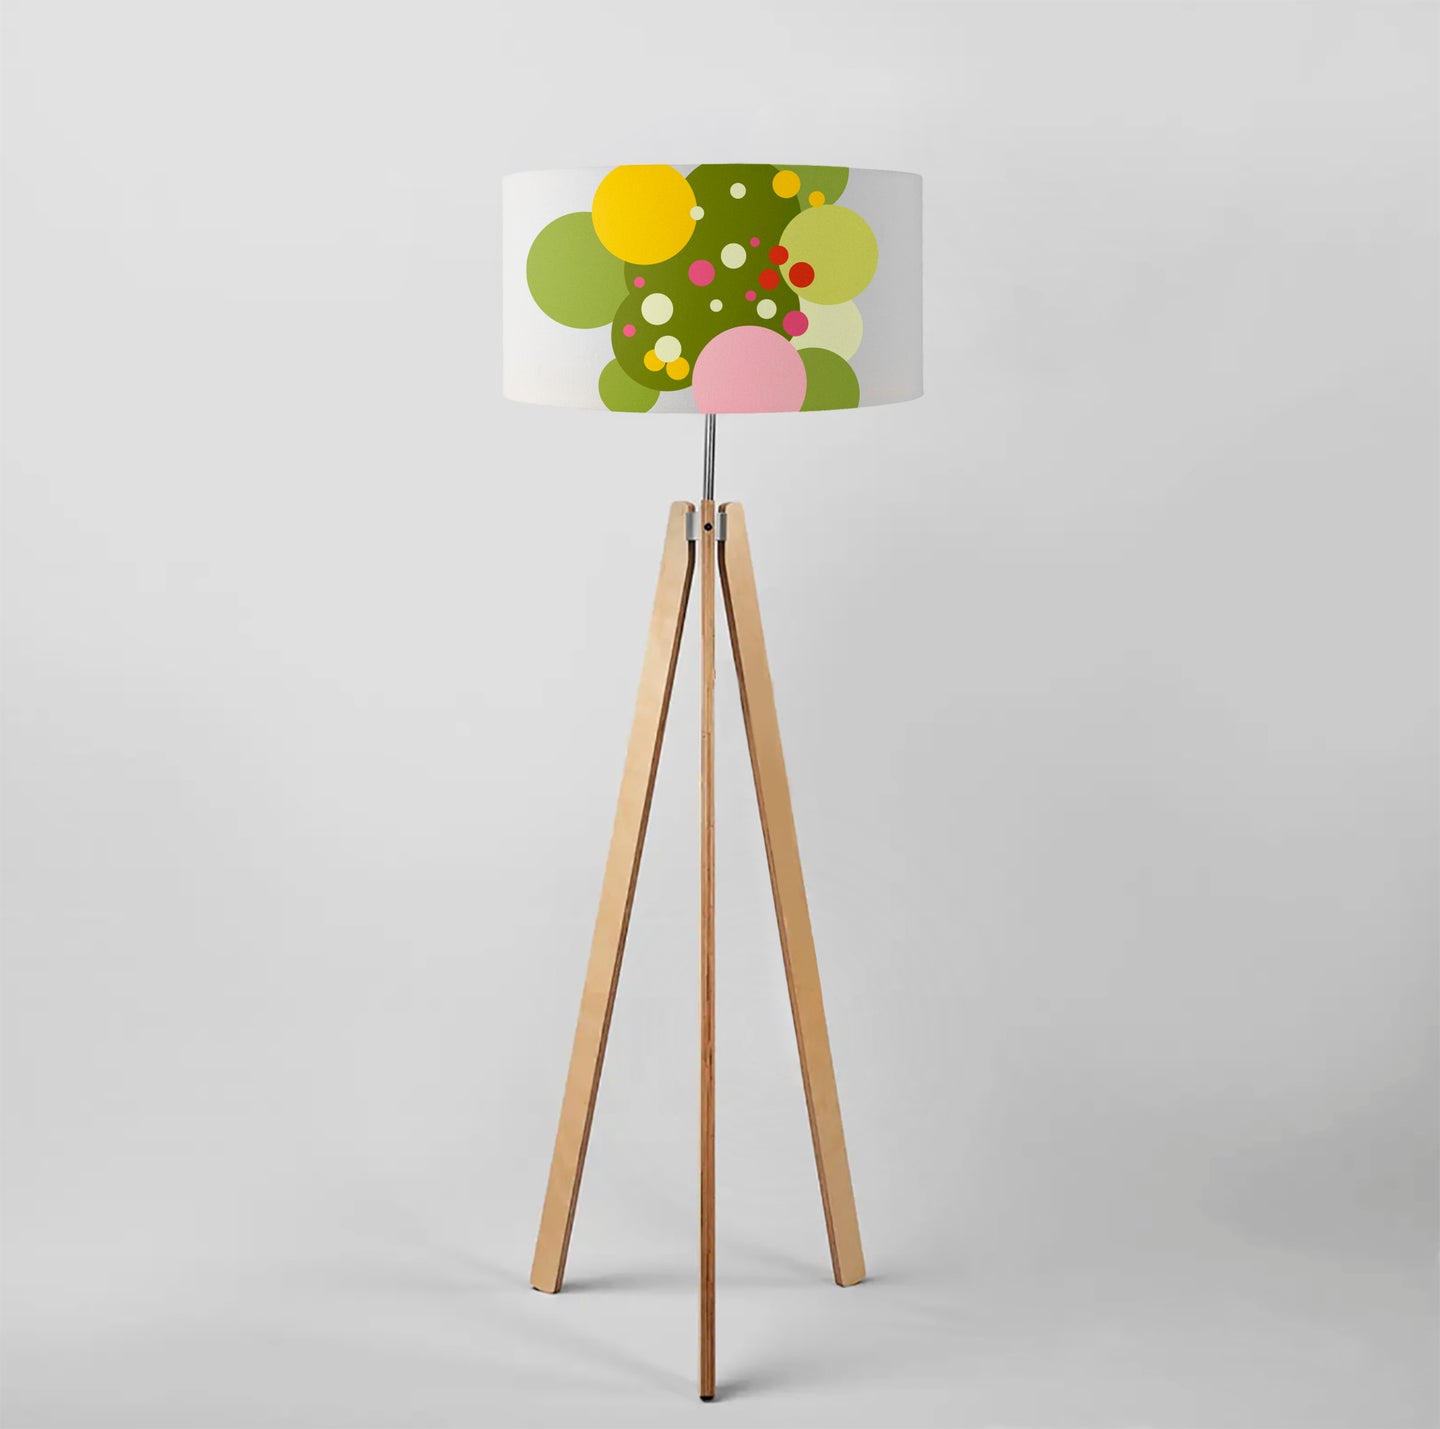 Geometric Abstract Bouquet of Flowers drum lampshade, Diameter 40cm (16